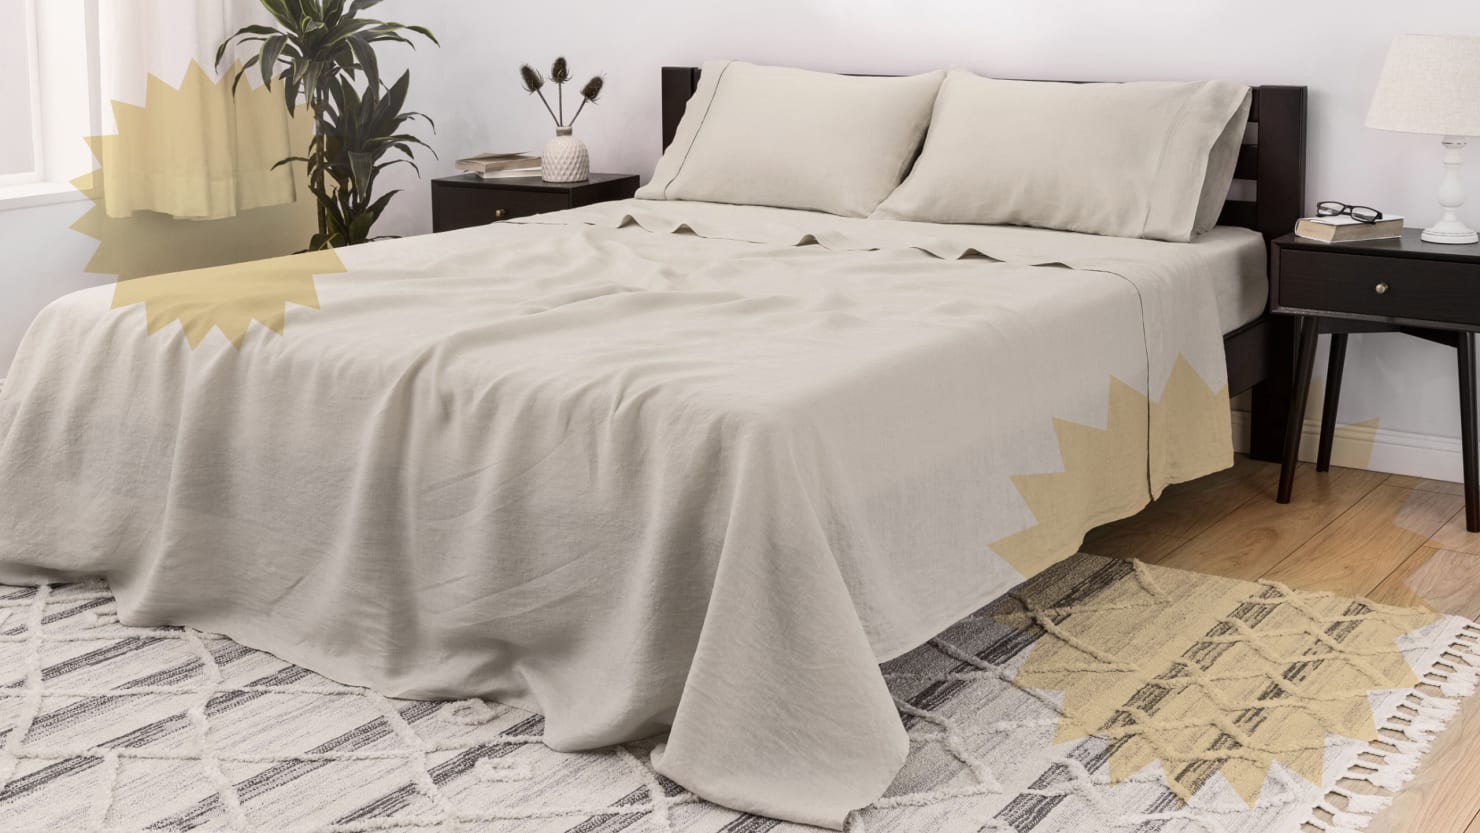 Mellanni 100% Linen Sheets - The Daily Beast